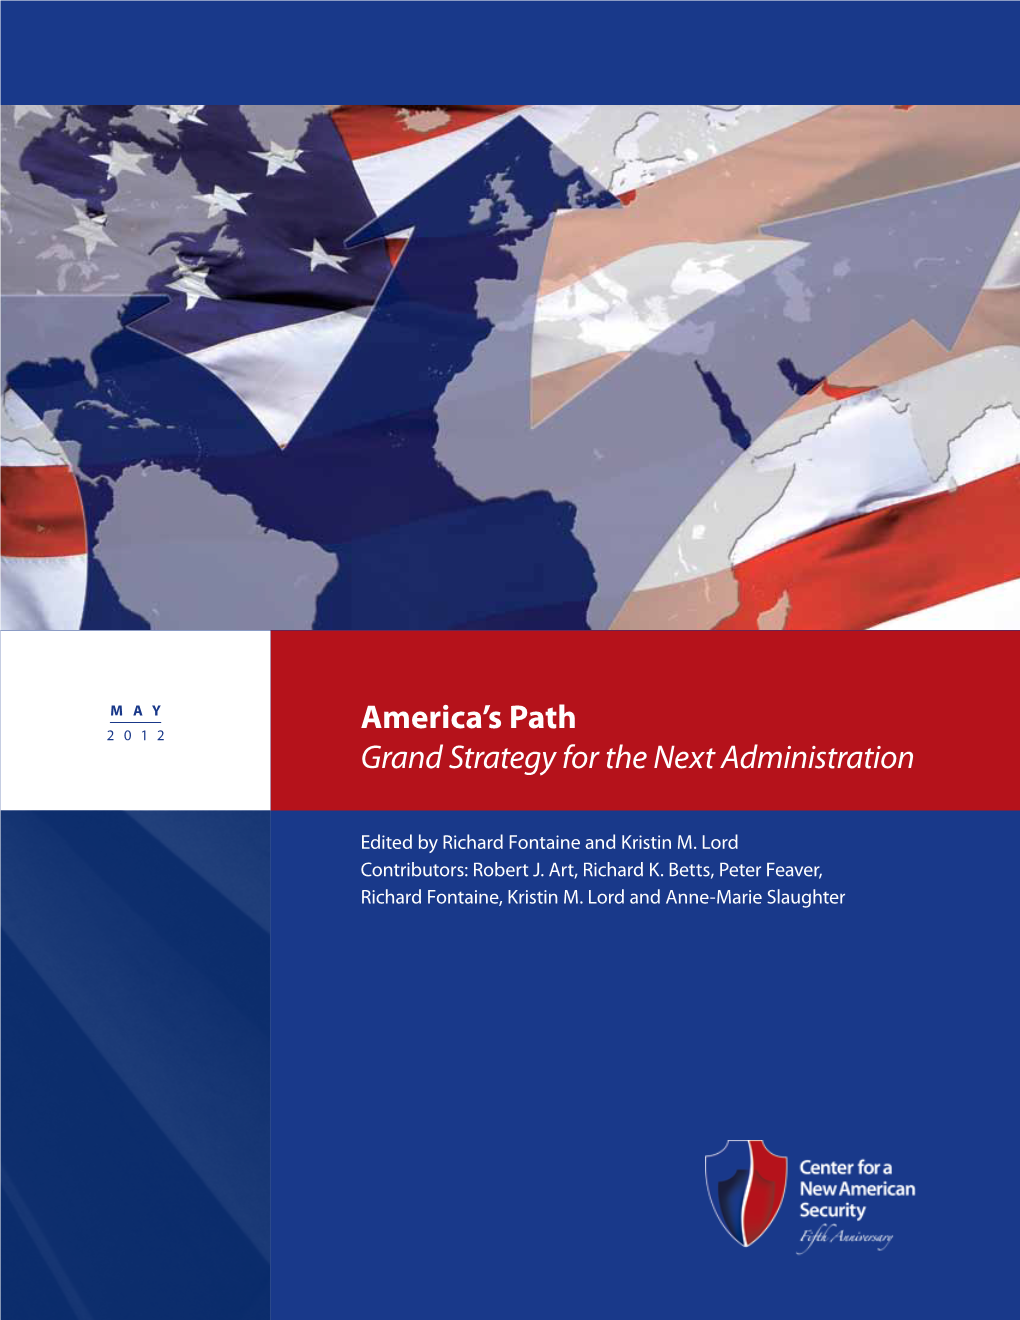 America's Path: Grand Strategy for the Next Administration